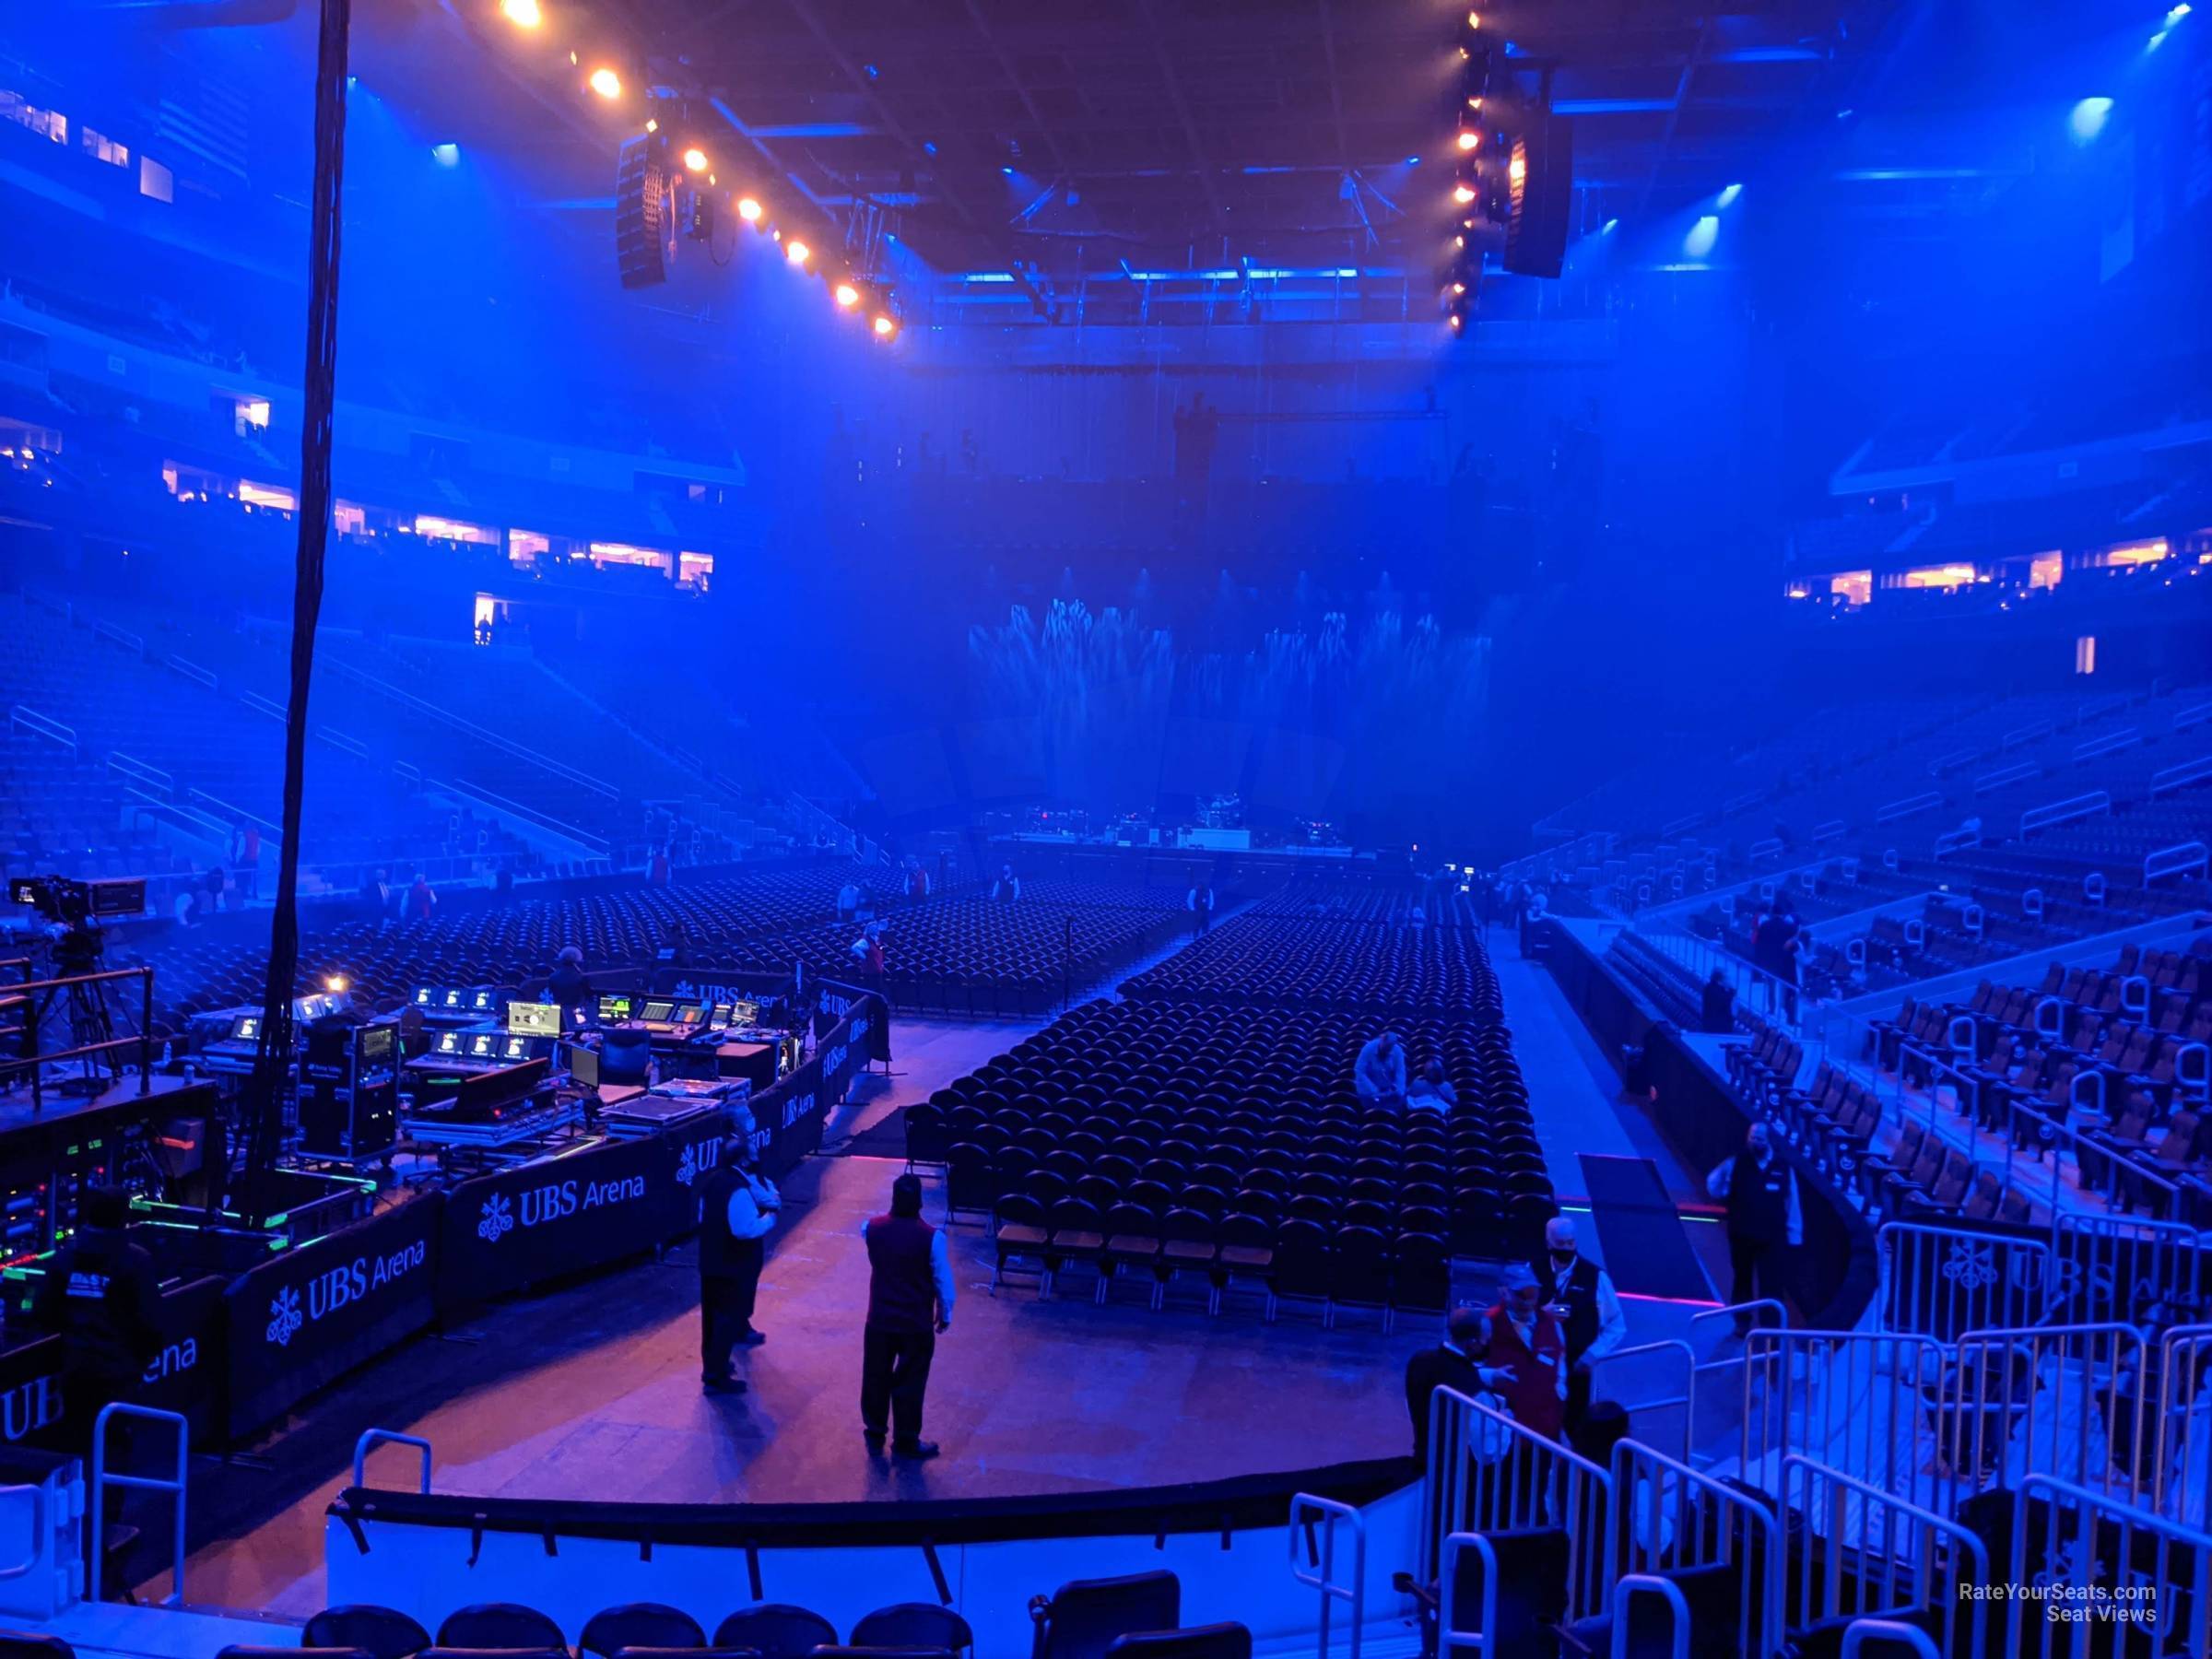 section 108, row 9 seat view  for concert - ubs arena